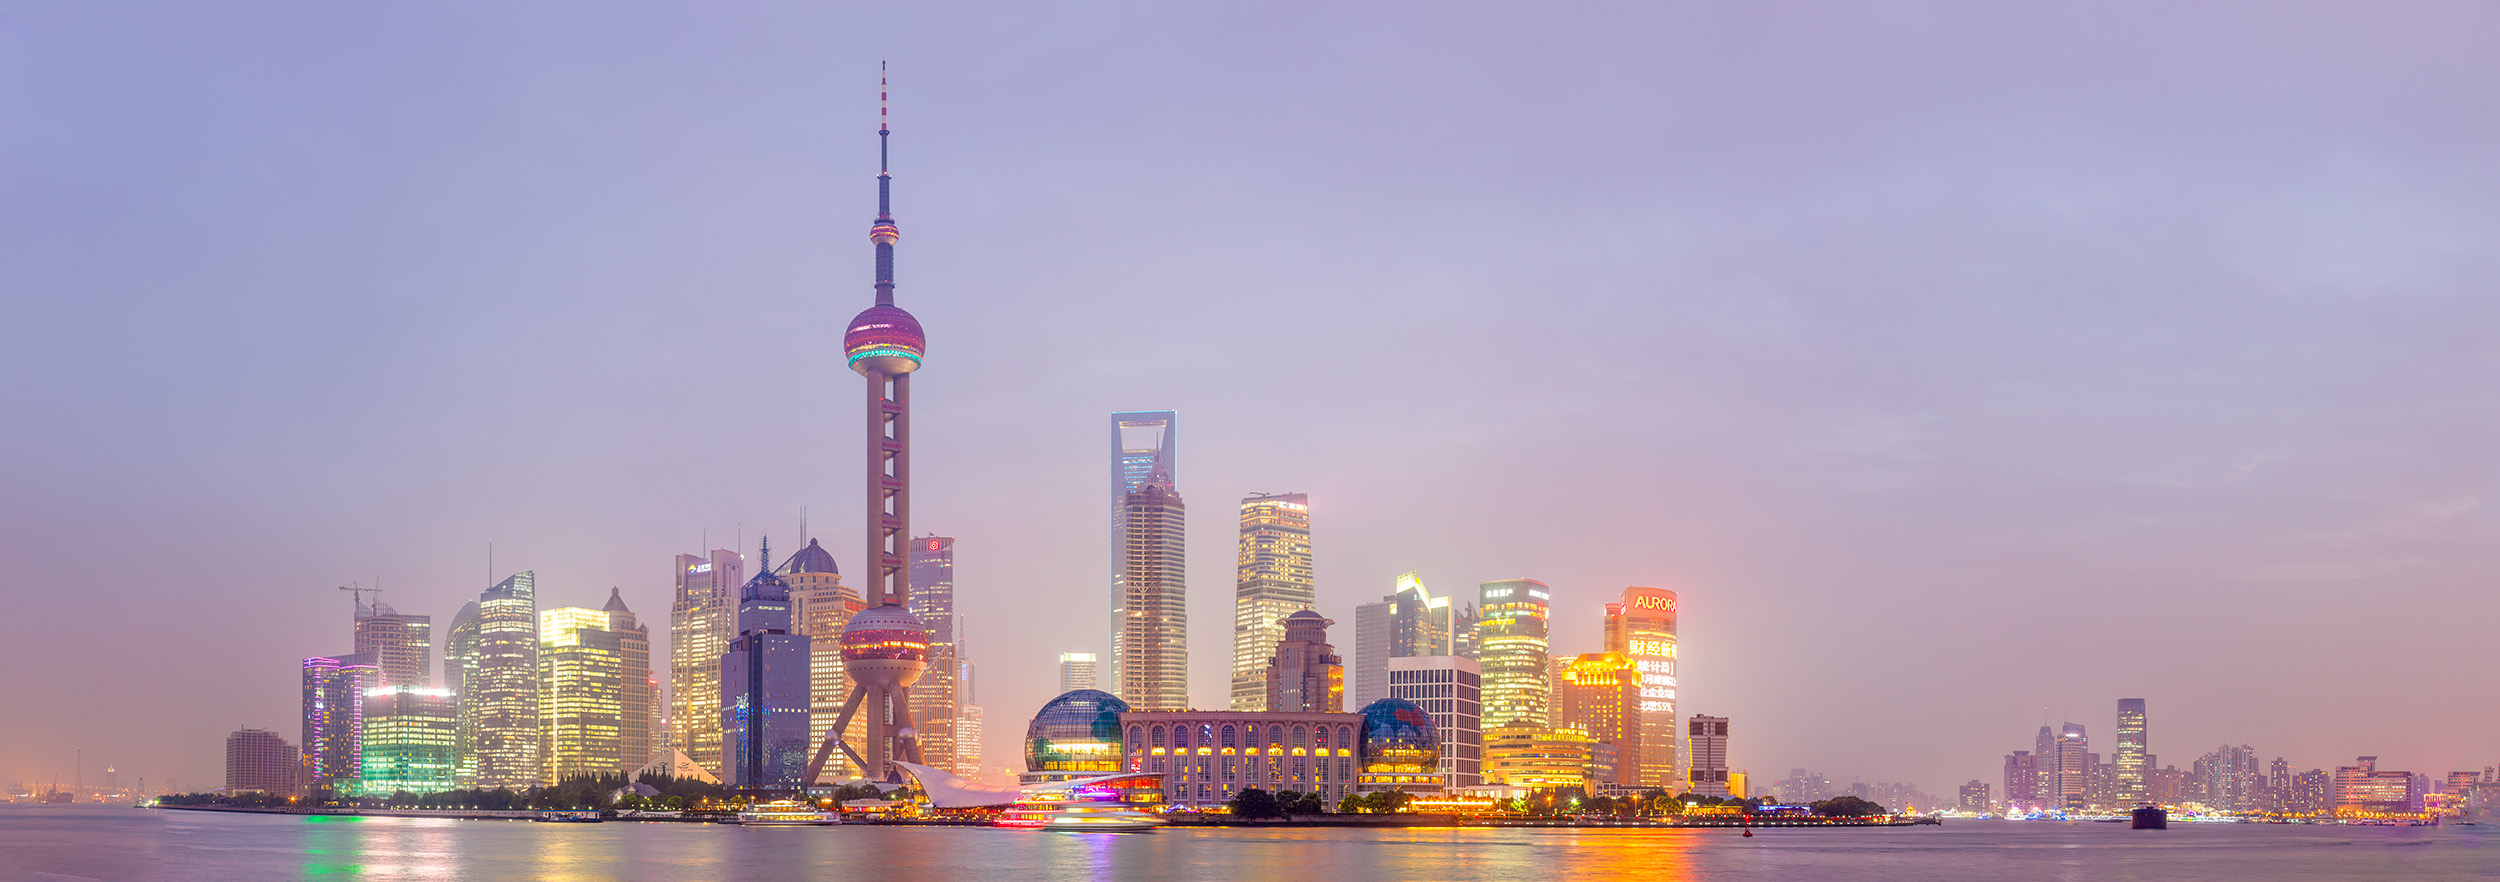 This panoramic image was taken from the iconic Bund side of Shanghai, gazing across the water at the Pudong skyline illuminated...